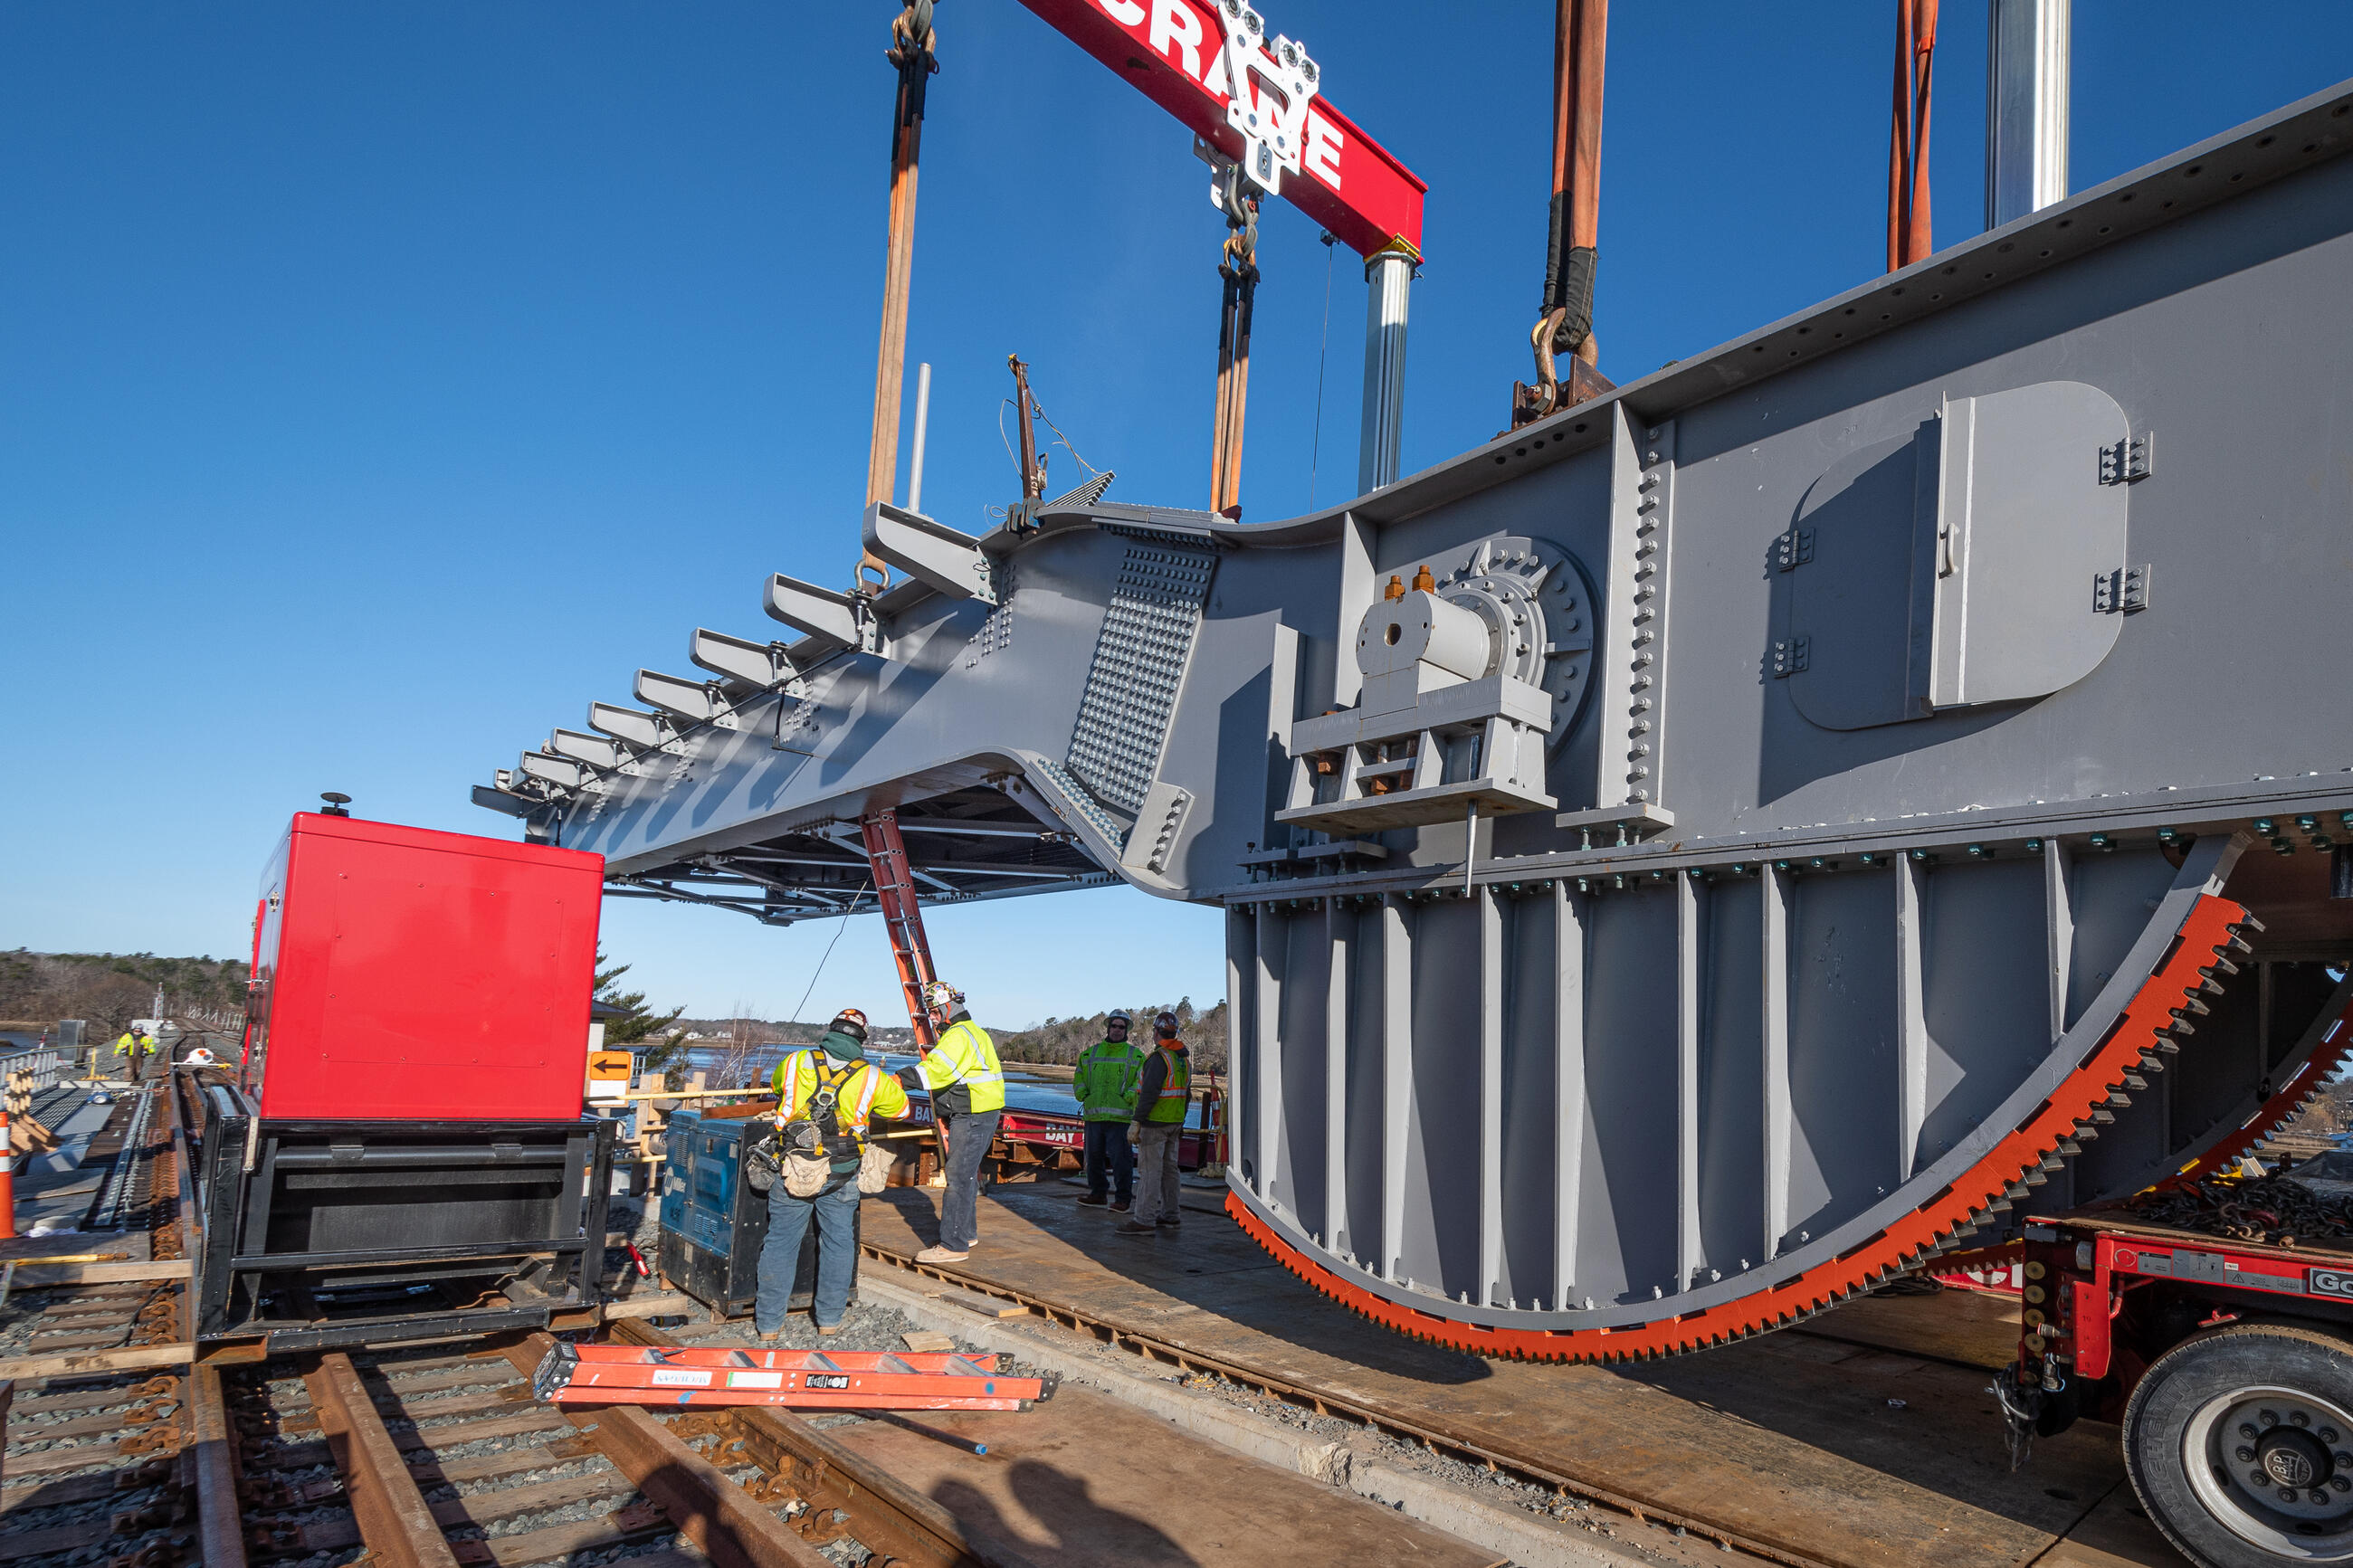 Construction workers install a new bascule on the gloucester drawbridge. A bascule is the movable section of bridge that is raised and lowered.